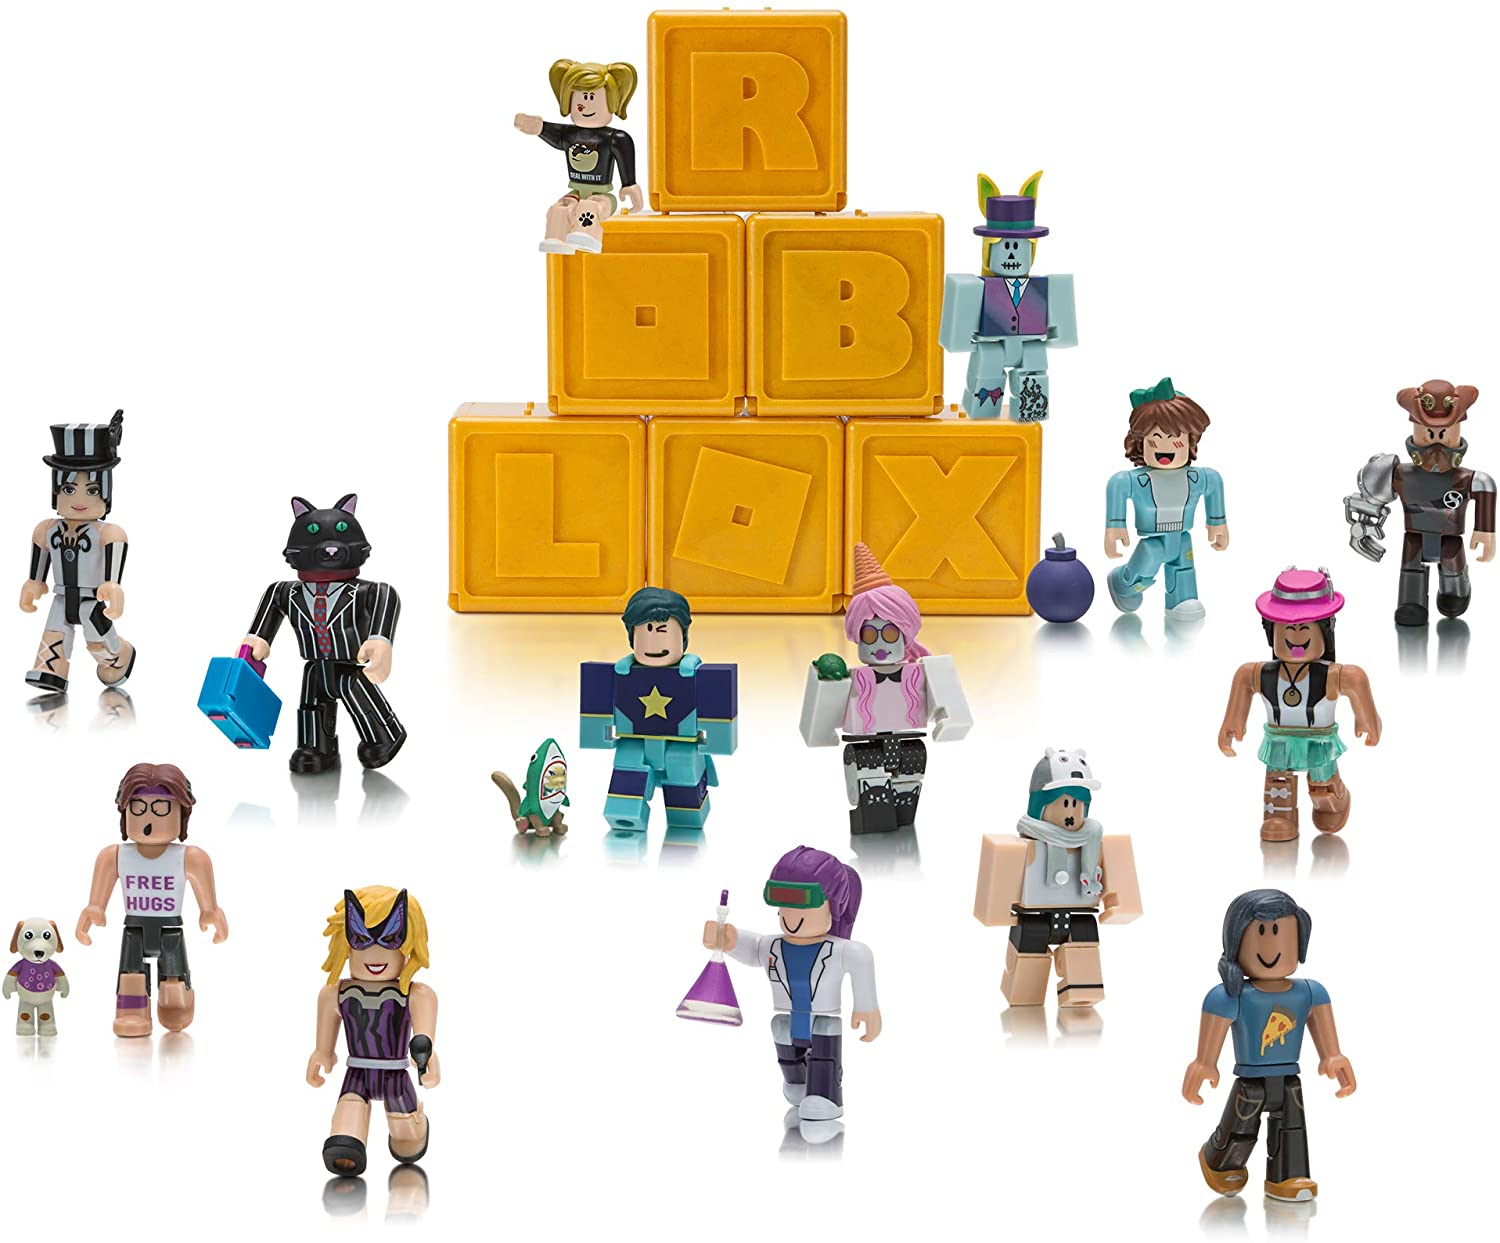 Roblox Celebrity Series 1 Mystery Box Codes Sky Toy Box - details about roblox university professor purple hair figure